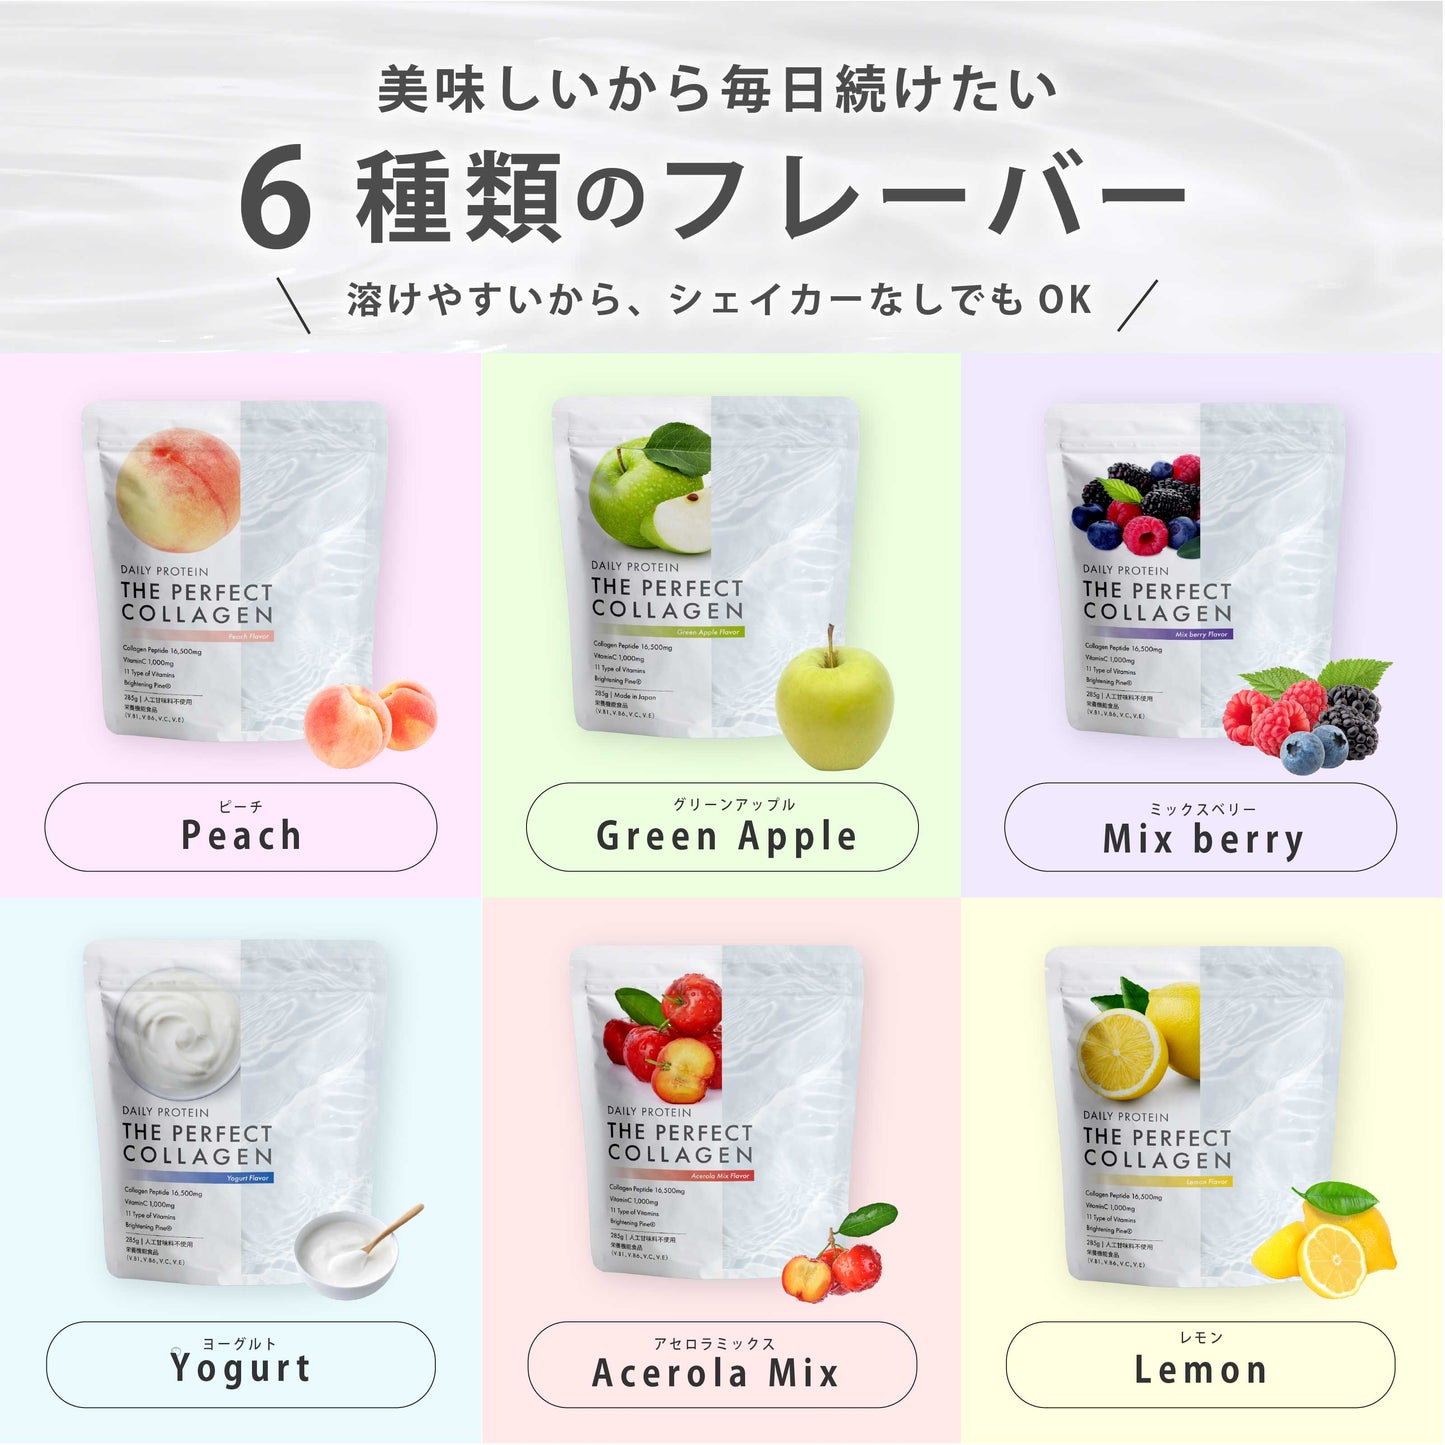 Daily Protein THE PERFECT COLLAGEN レモン味 285g